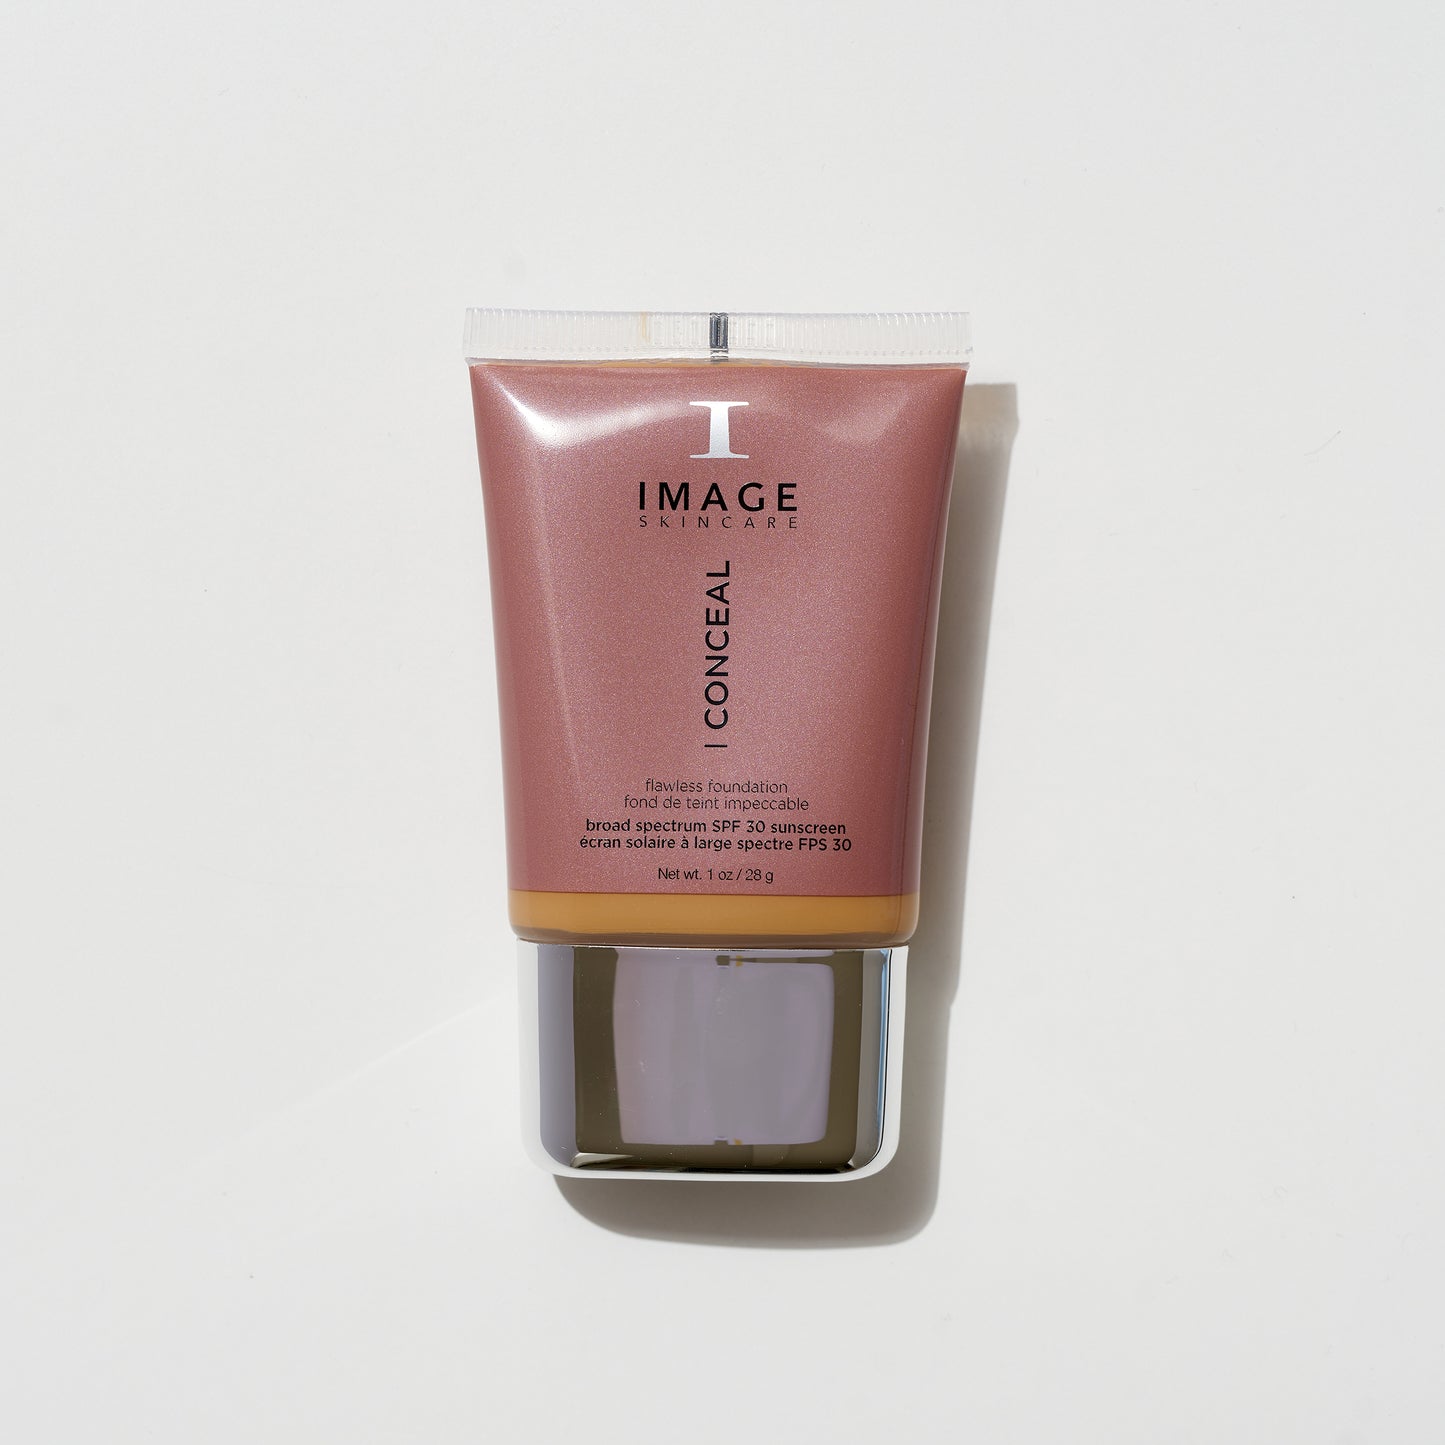 I CONCEAL flawless foundation broad-spectrum SPF 30 sunscreen toffee, Image Skincare